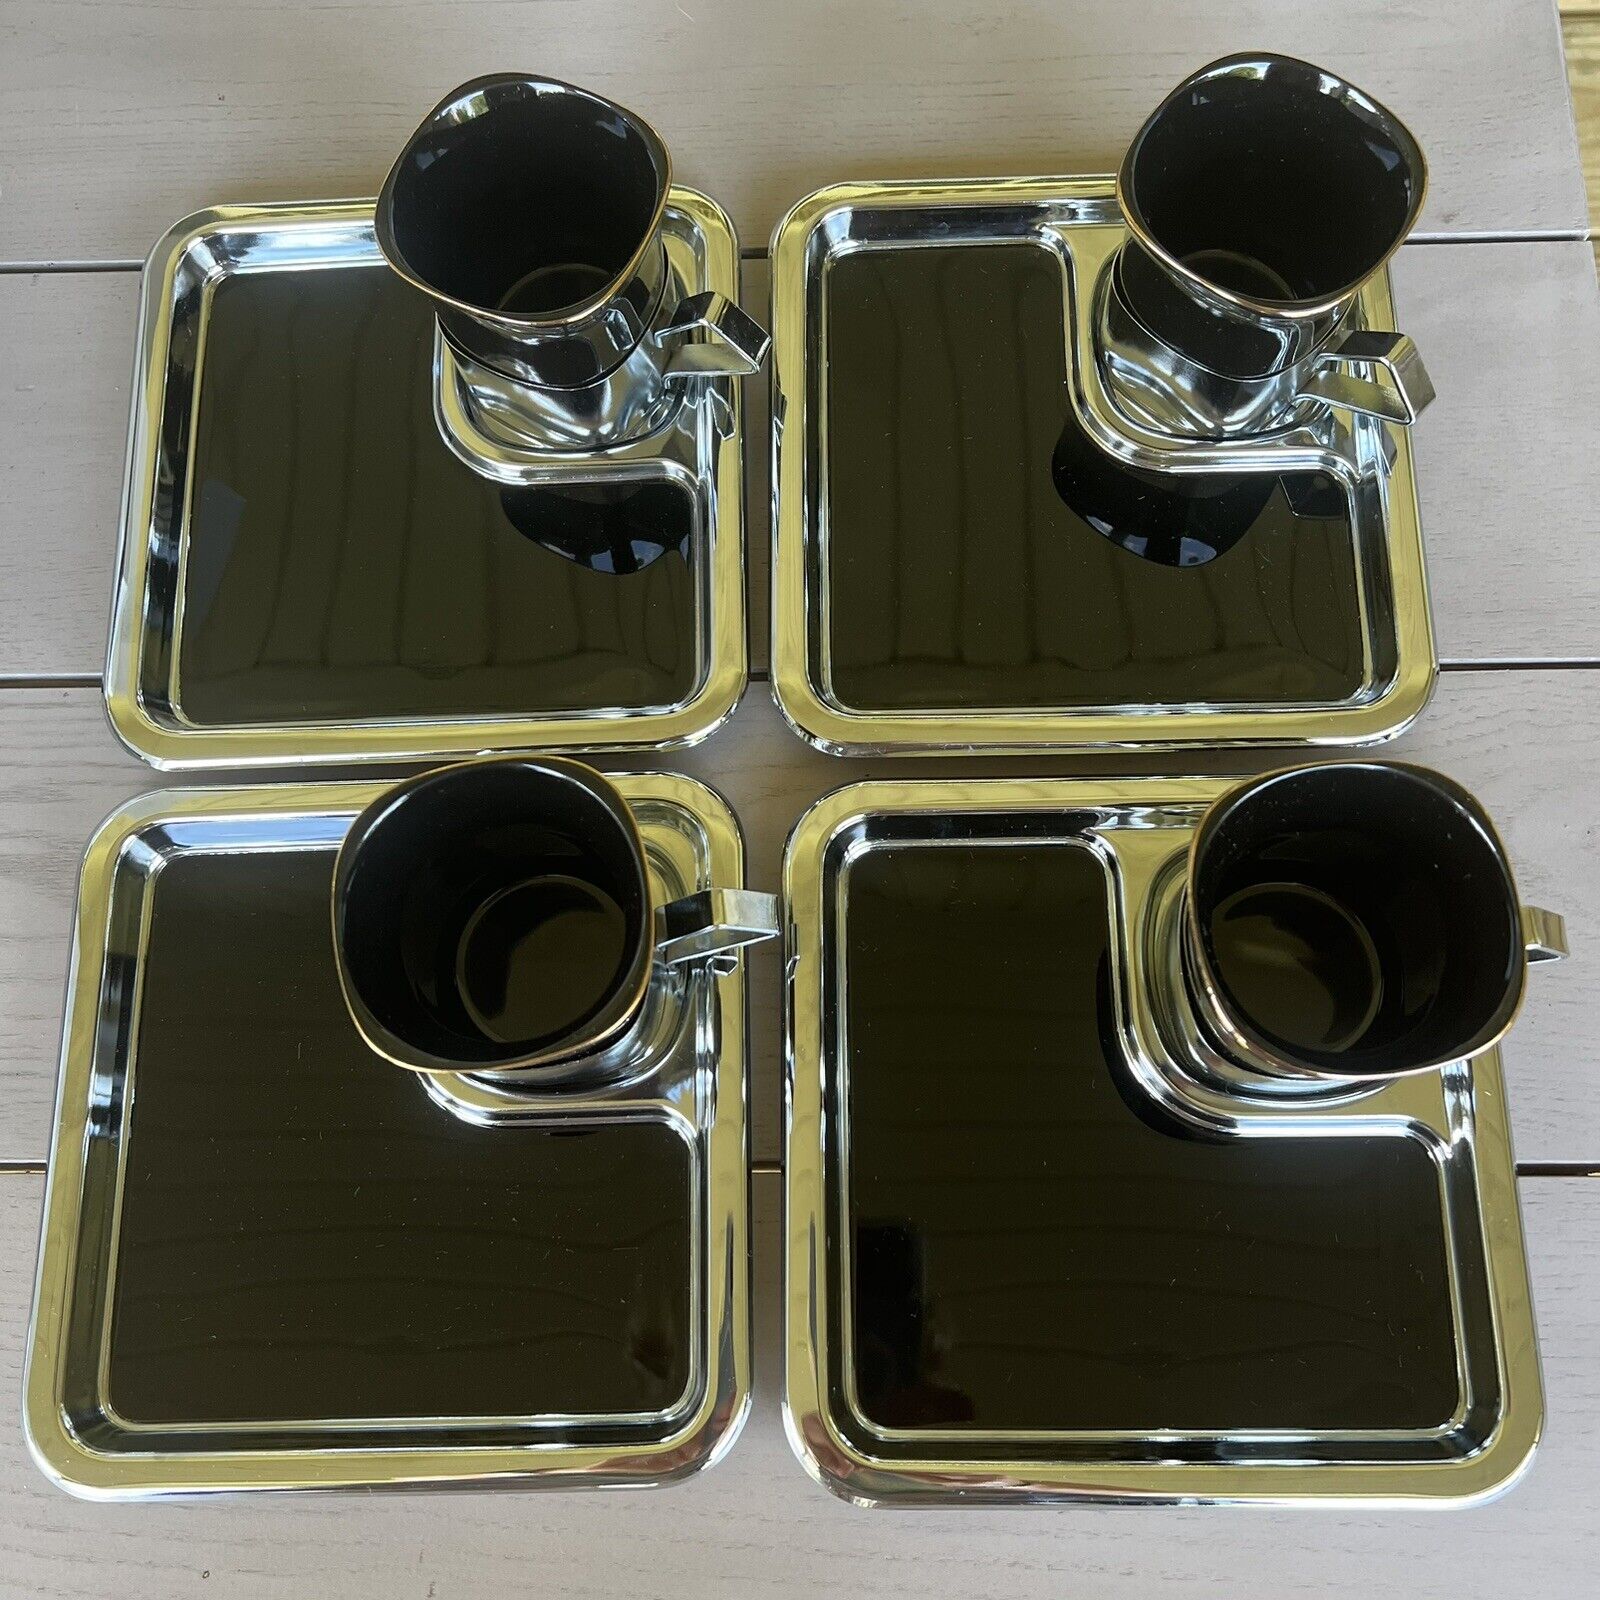 Set of 4 Japan Chrome Enamel Snack Tray Black Expresso Cup Twin Bird Industrial